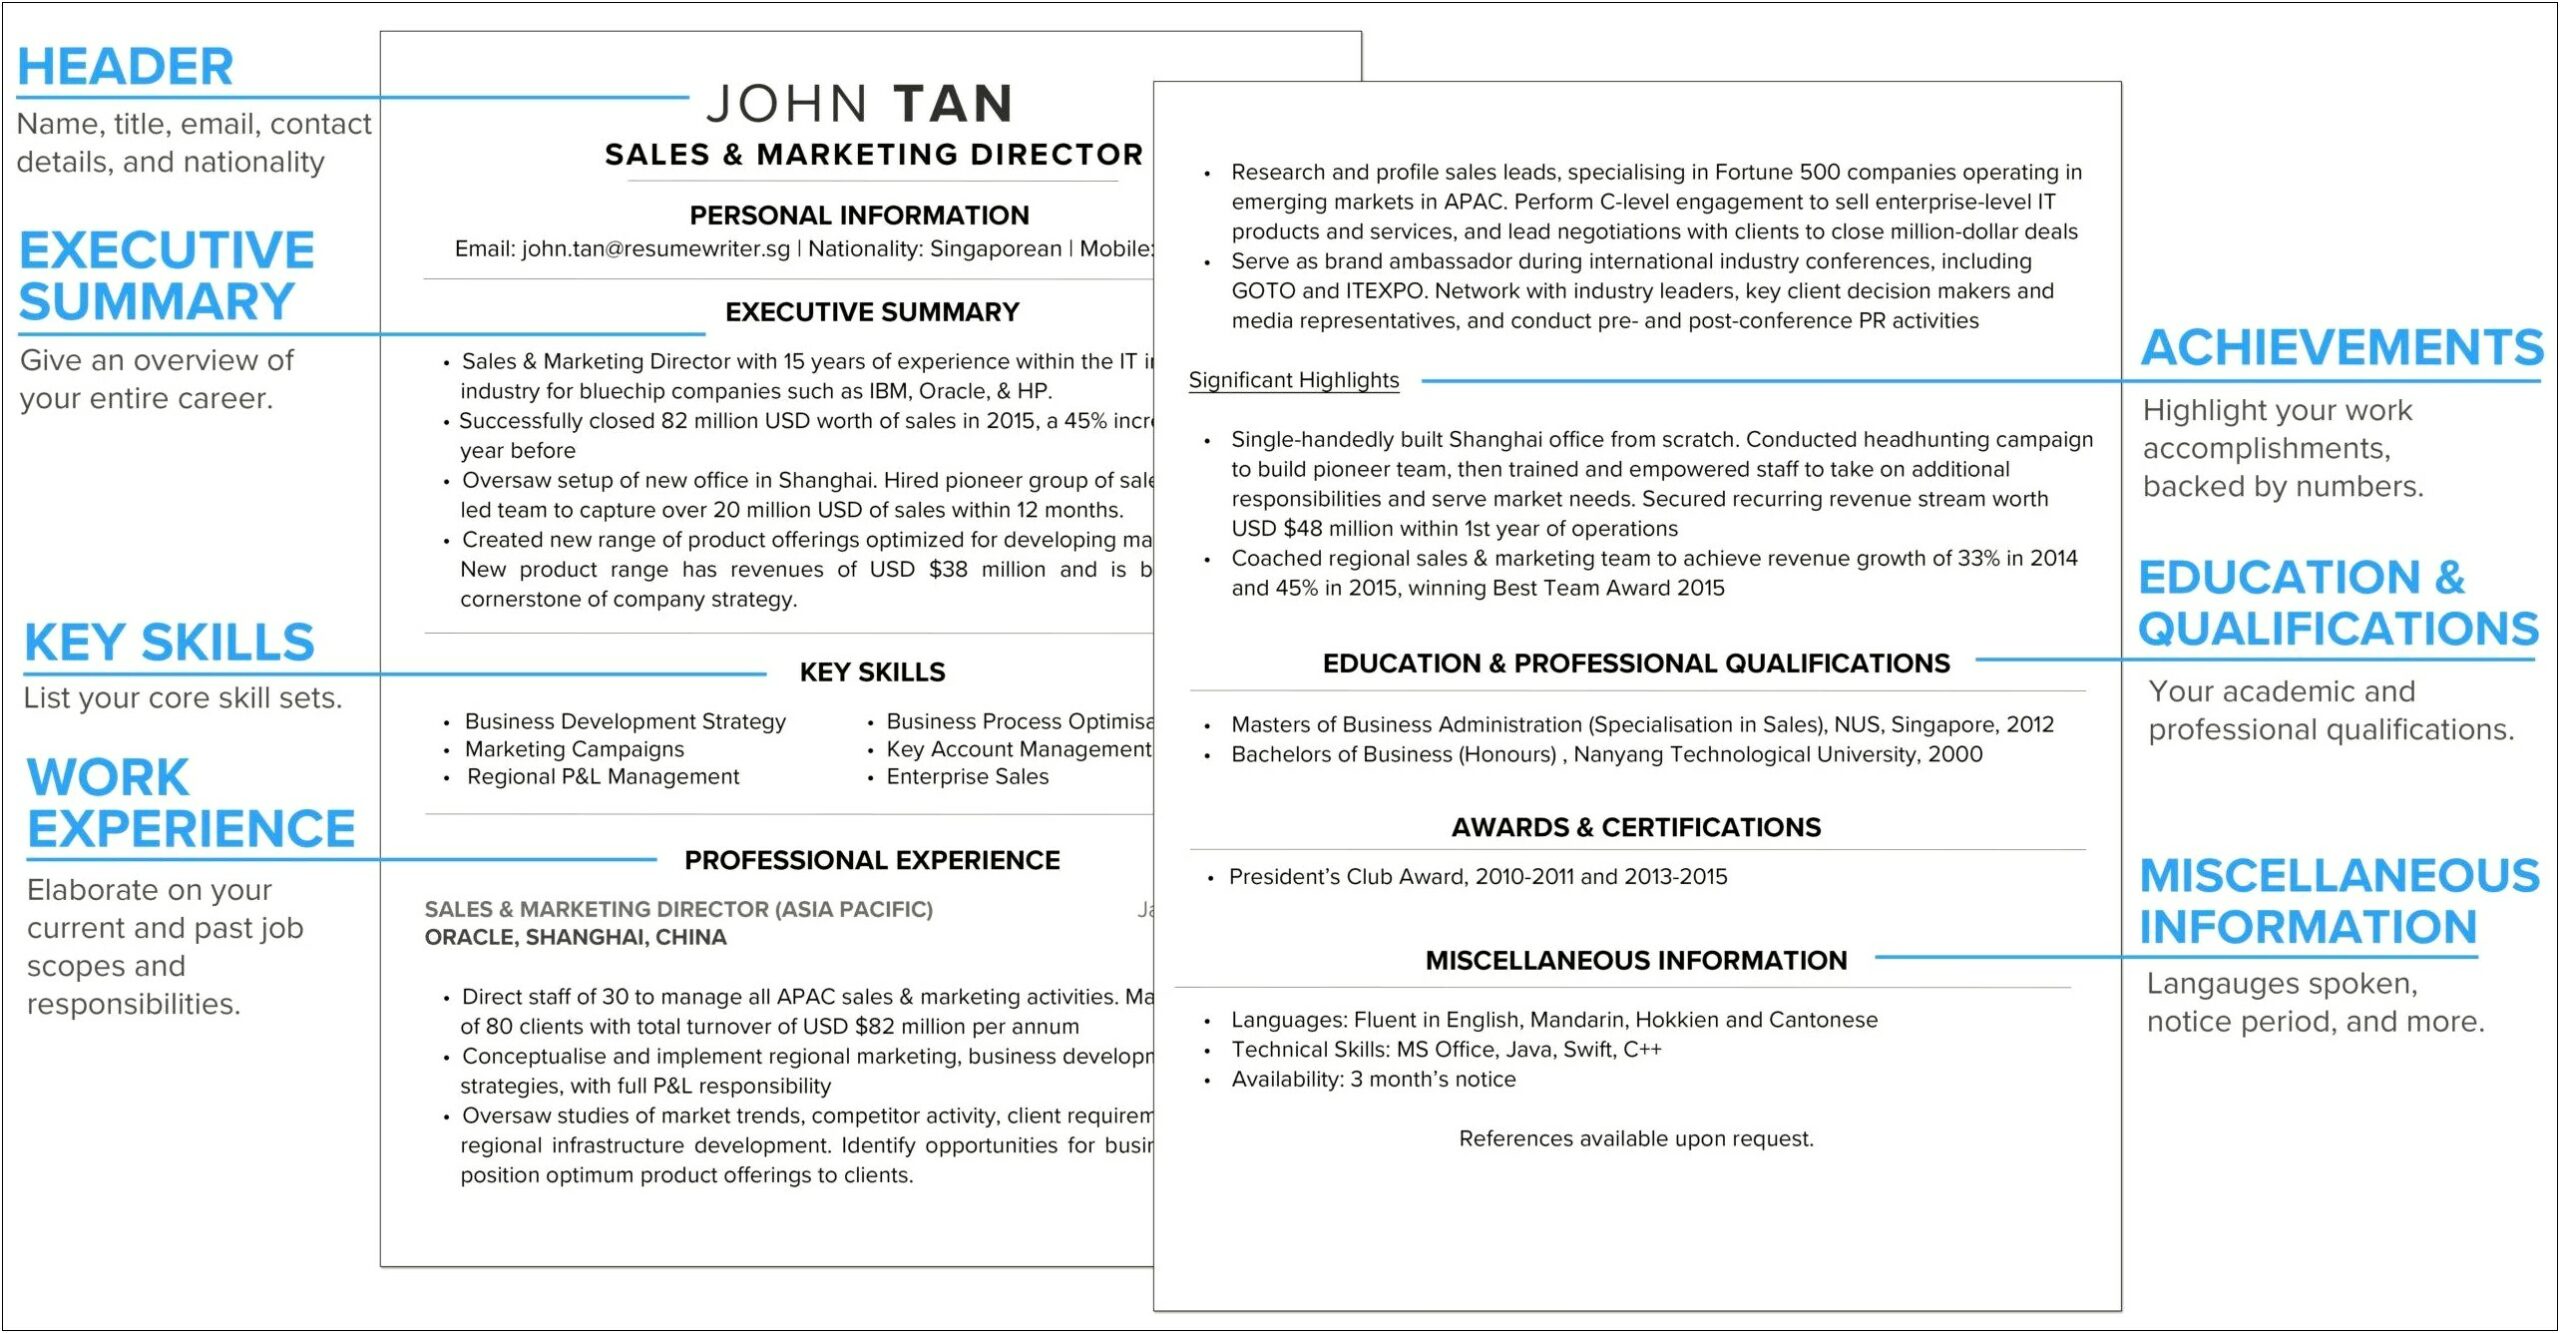 Difference Between Qualifications And Skills In Resume